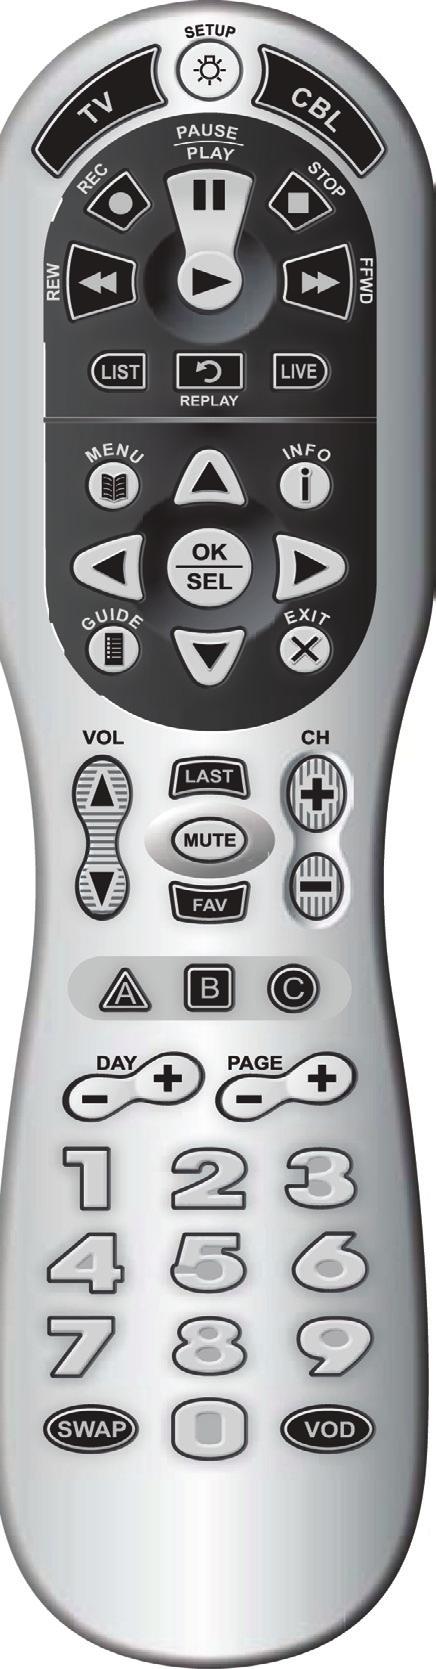 Universal Remote Control Turn TV On/Off Press TV or CBL once* Note: TV must be on Channel 4. *If your screen displays: Press and then PWR to activate. Then press the CBL button.